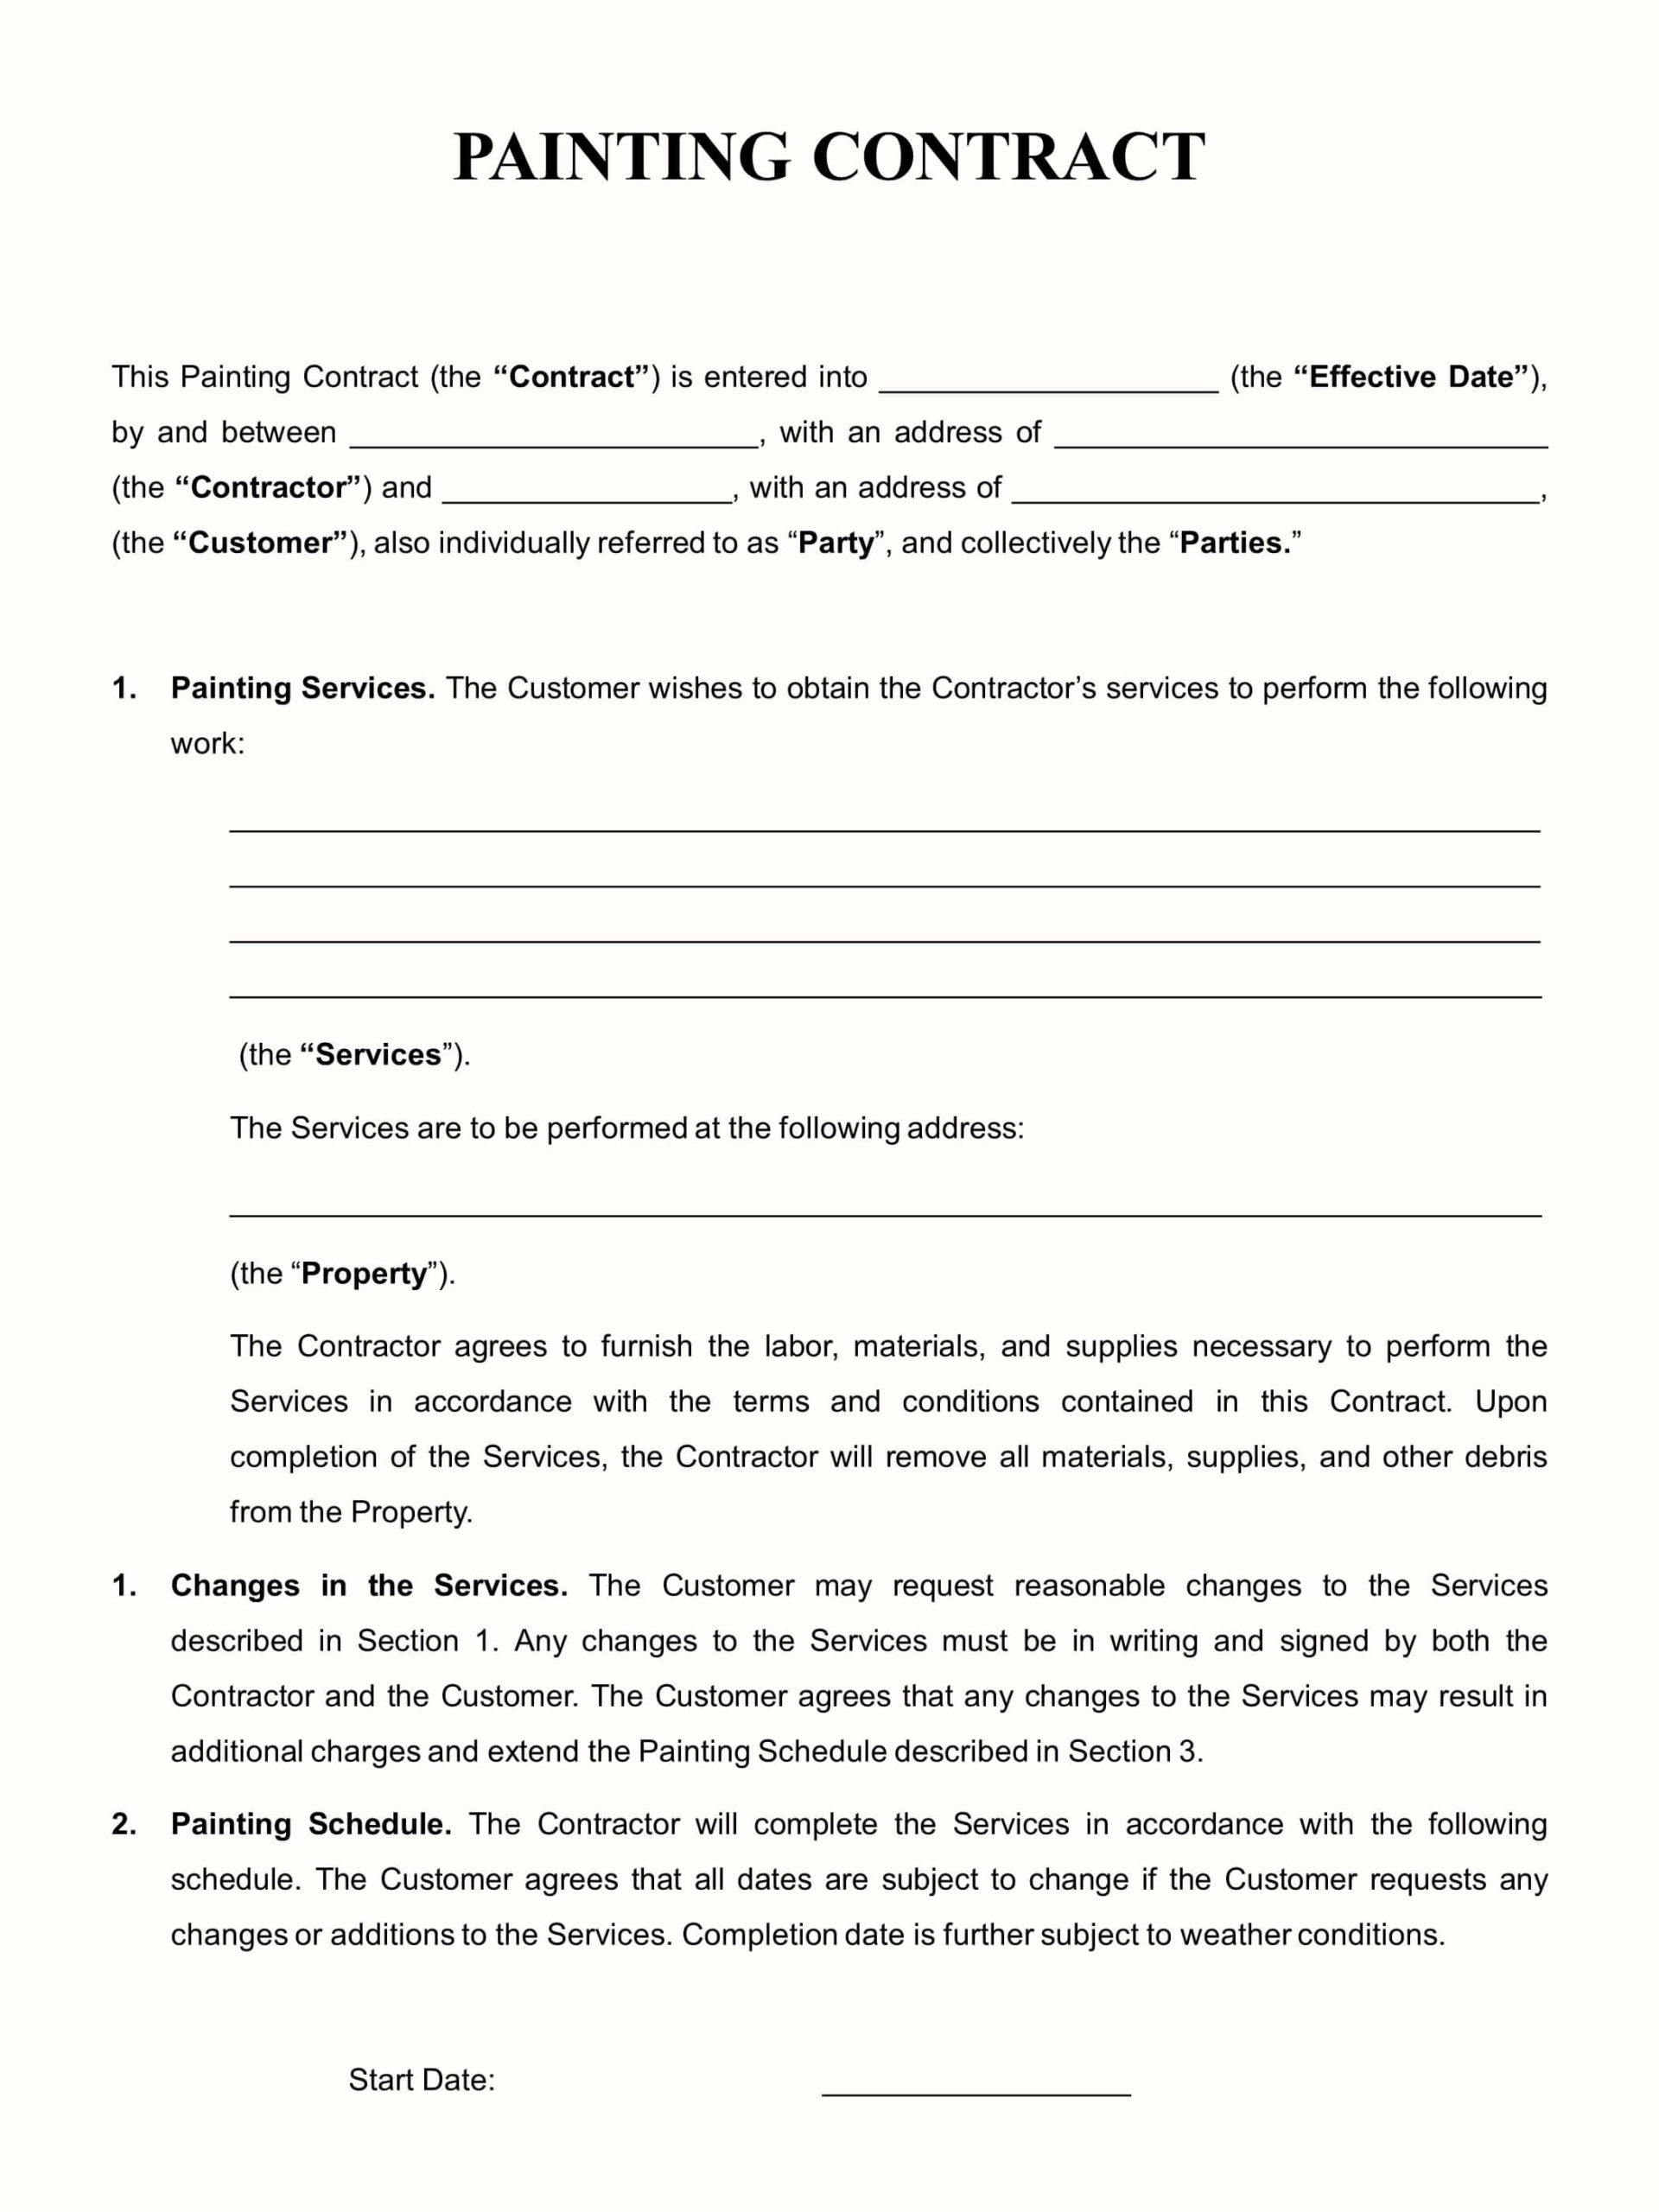 painting-contract-template